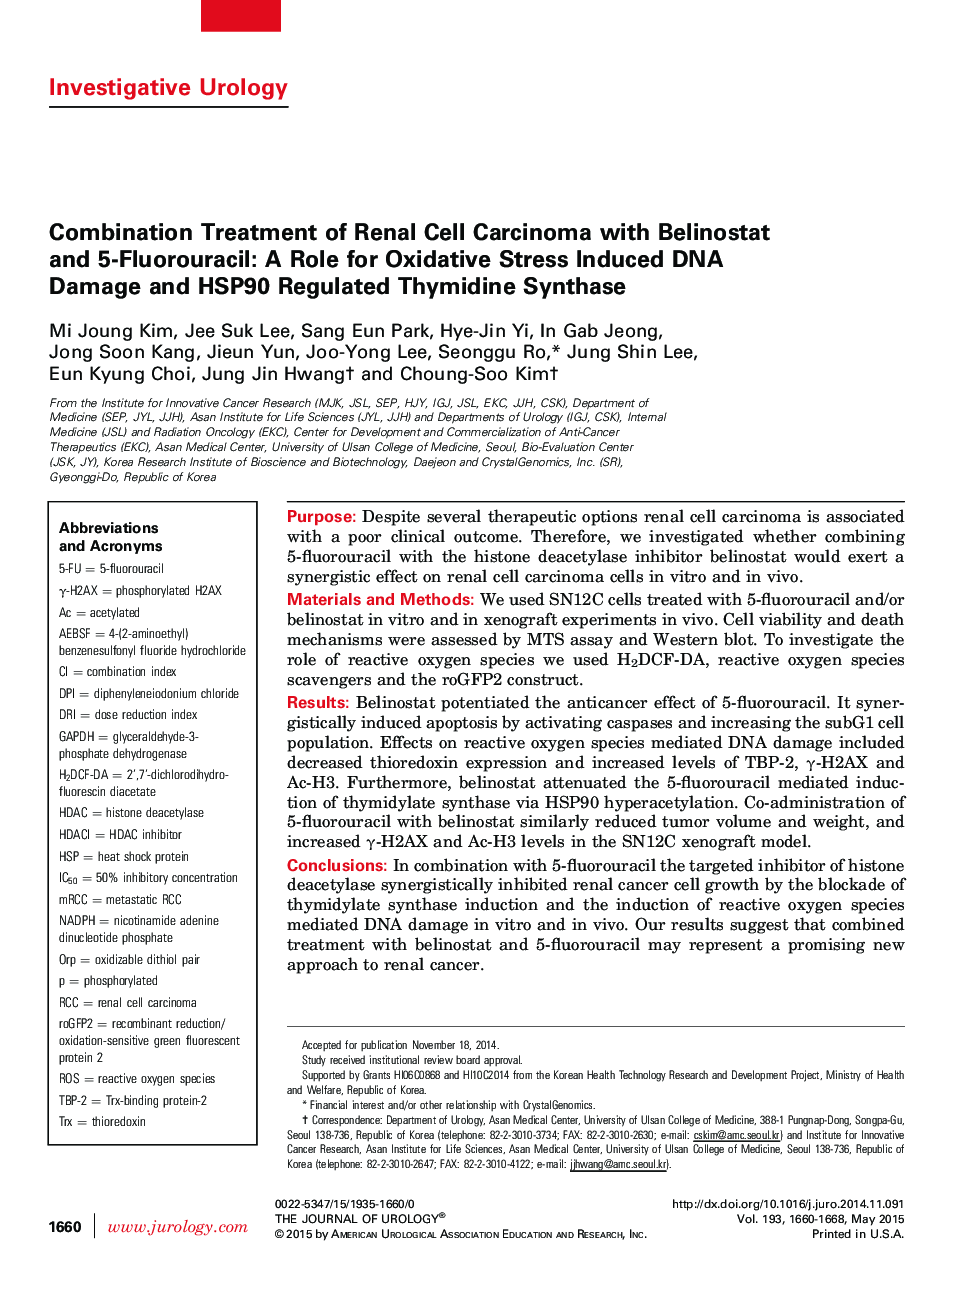 Combination Treatment of Renal Cell Carcinoma with Belinostat and 5-Fluorouracil: A Role for Oxidative Stress Induced DNA Damage and HSP90 Regulated Thymidine Synthase 